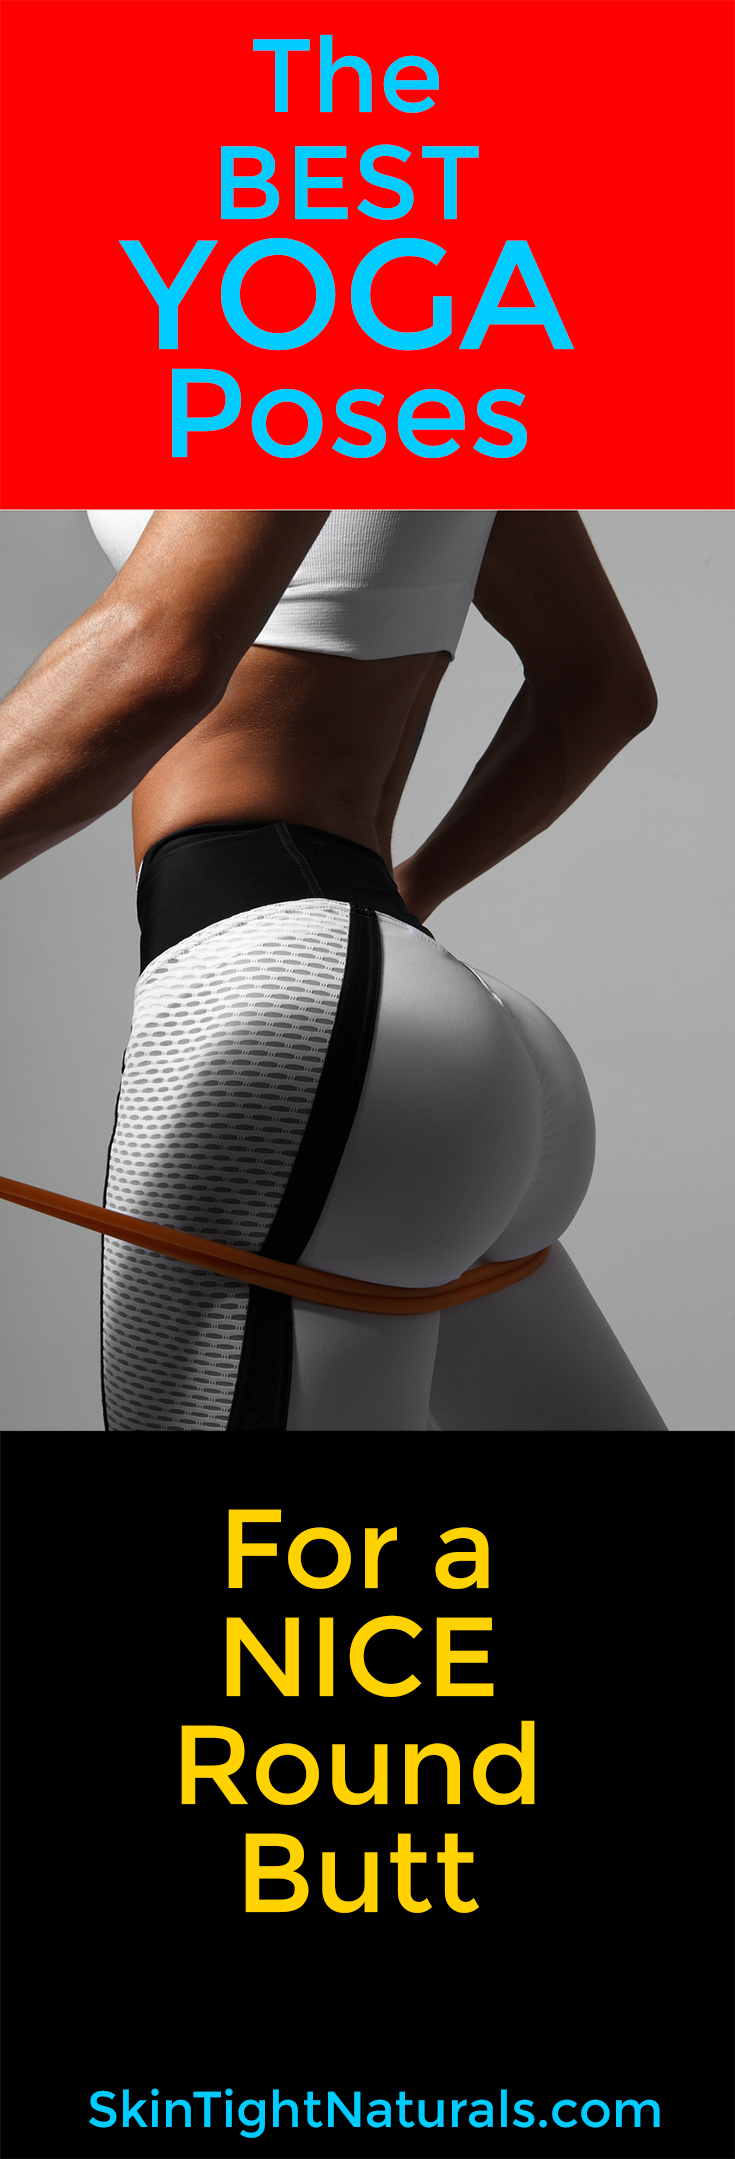 How to tone your butt without doing squats | Femina.in